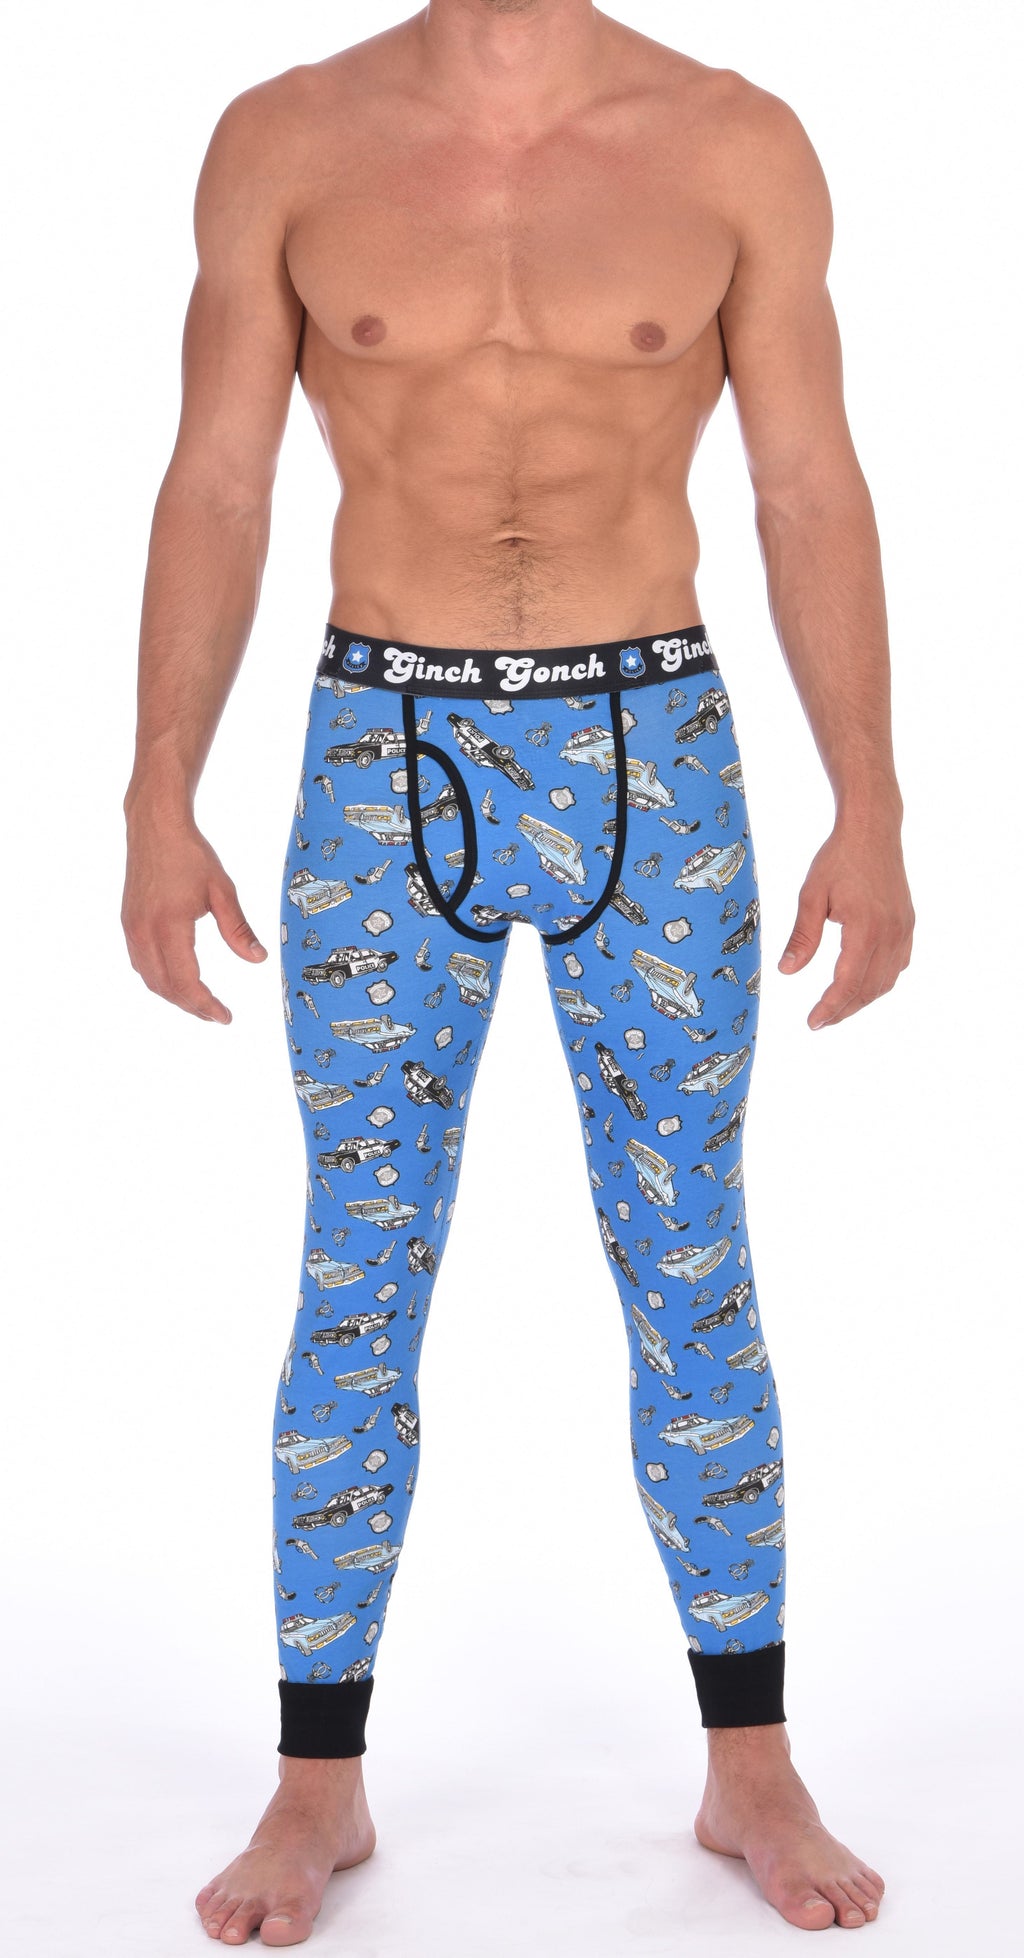 Ginch Gonch GG Patrol long john legging men's long underwear y front blue fabric with cop cars, badges, hand cuffs, and guns. Black trim and black printed waistband front. 